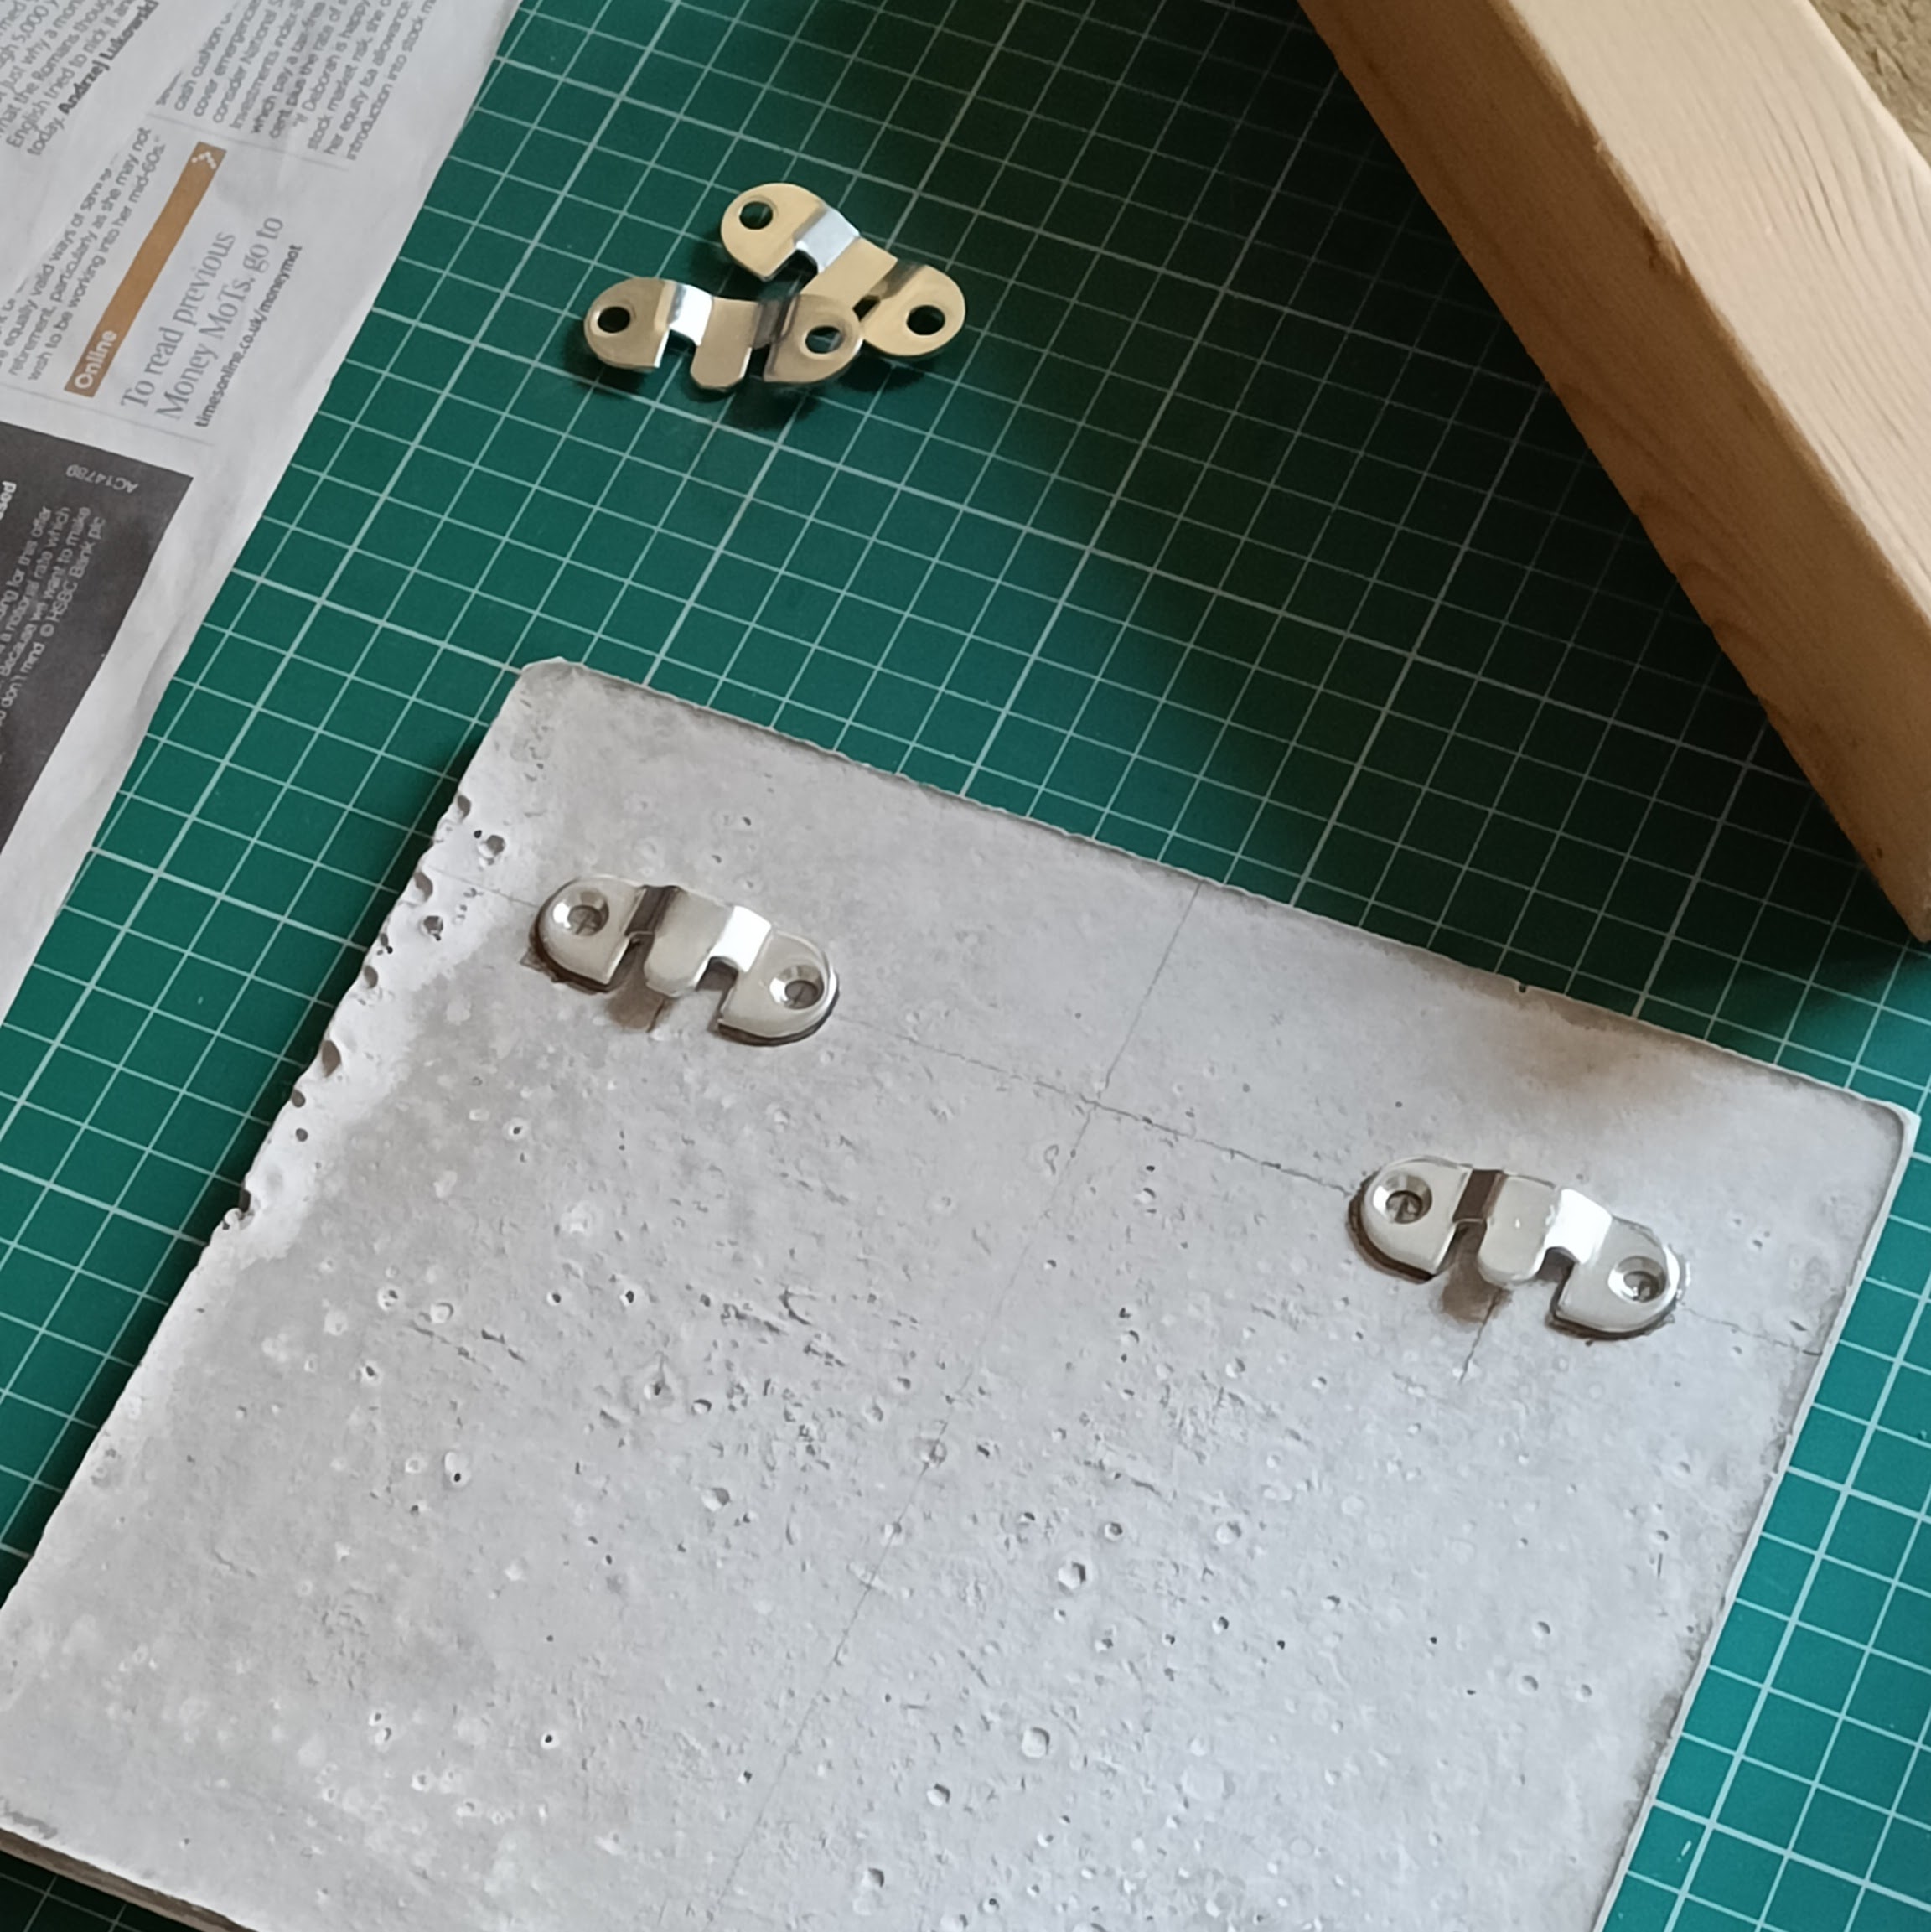 two metal mounting plates are glued to the back of the
  concrete plaque. Lying off to one side are the two other
  mounting plates that are identical and will eventually be
  screwed into the wall to support the plaque.